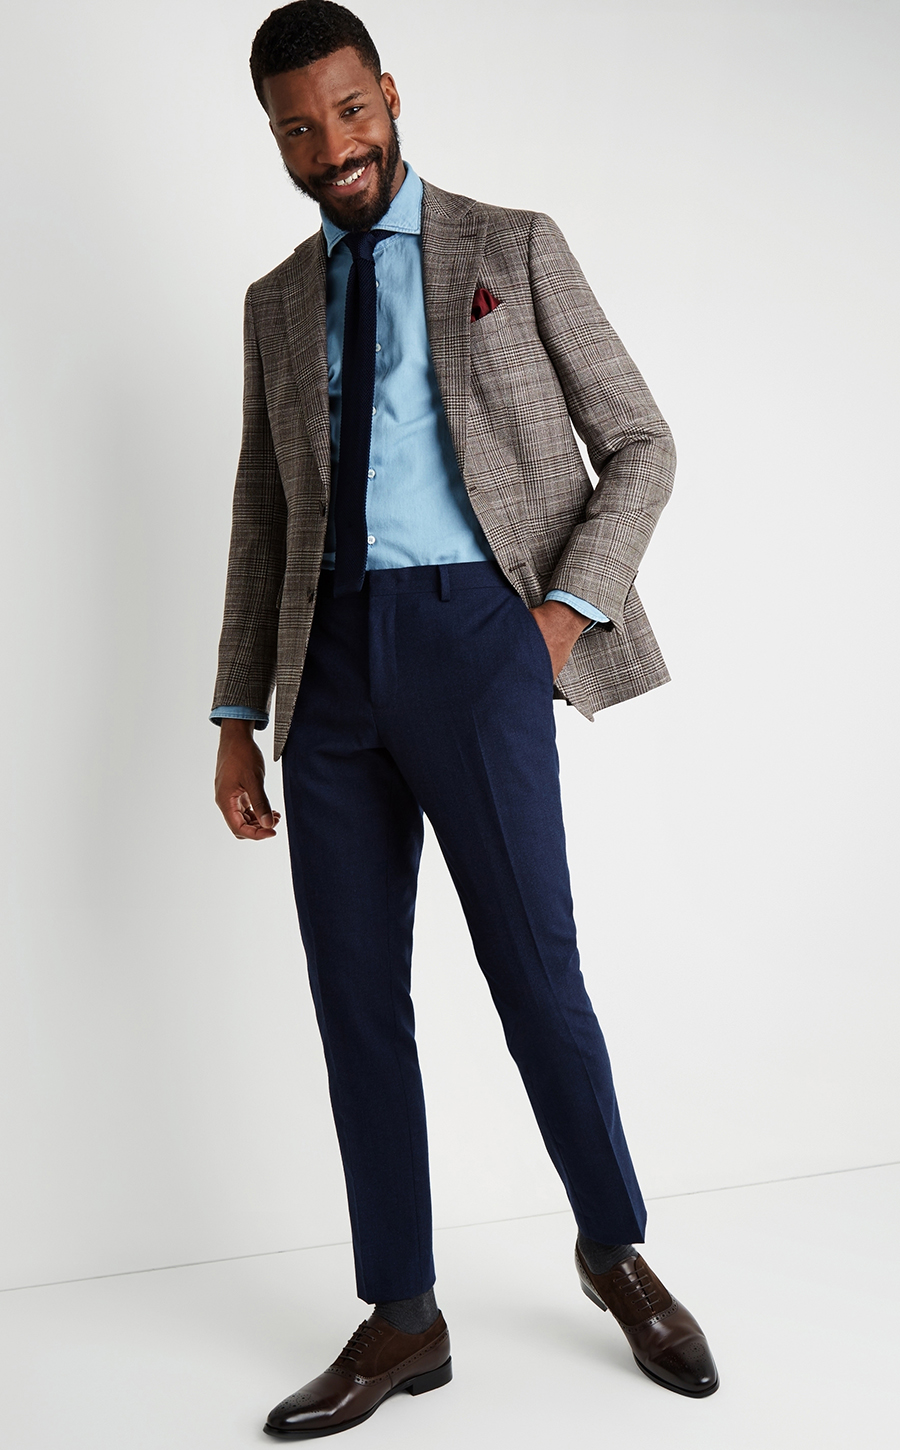 Brown houndstooth blazer, blue denim shirt, navy dress pants, navy knit tie, and brown oxfords outfit